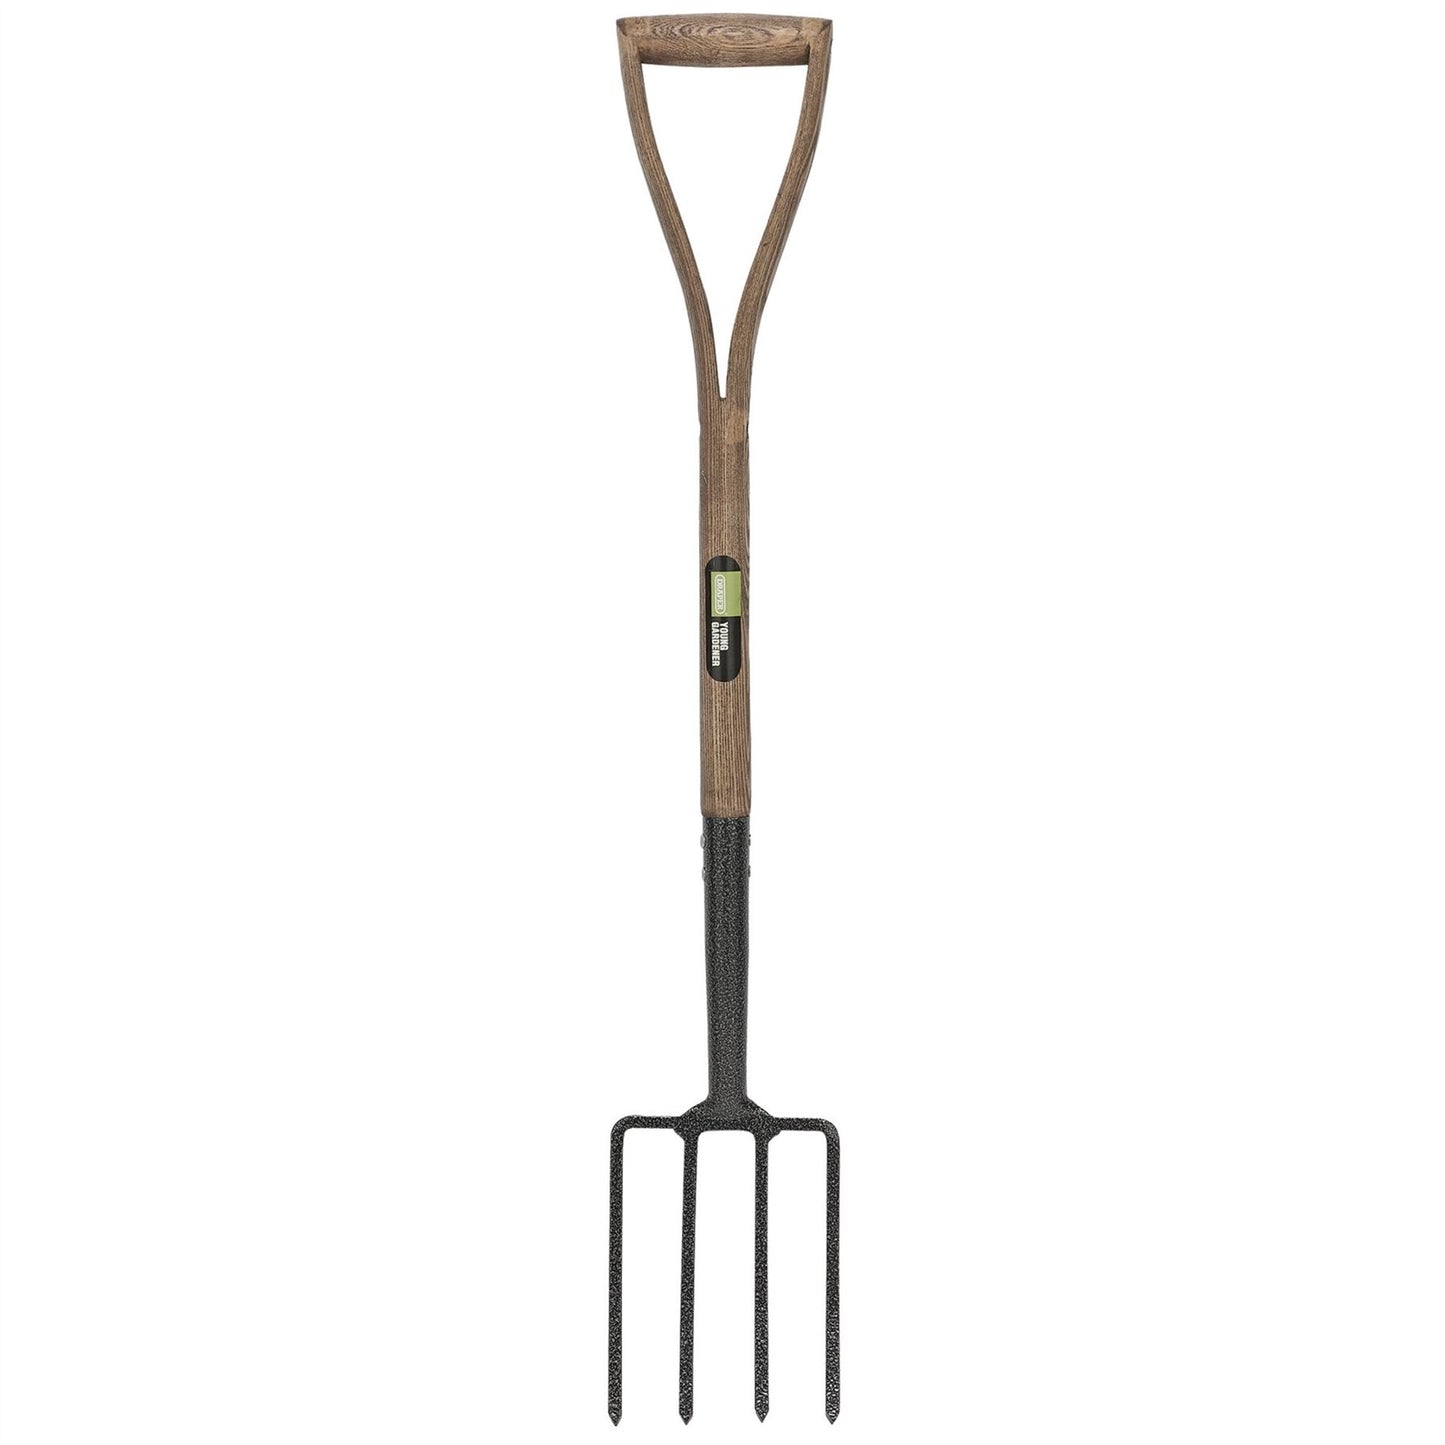 Draper 1x Young Gardener Digging Fork with Ash Handle Professional Tool 20680